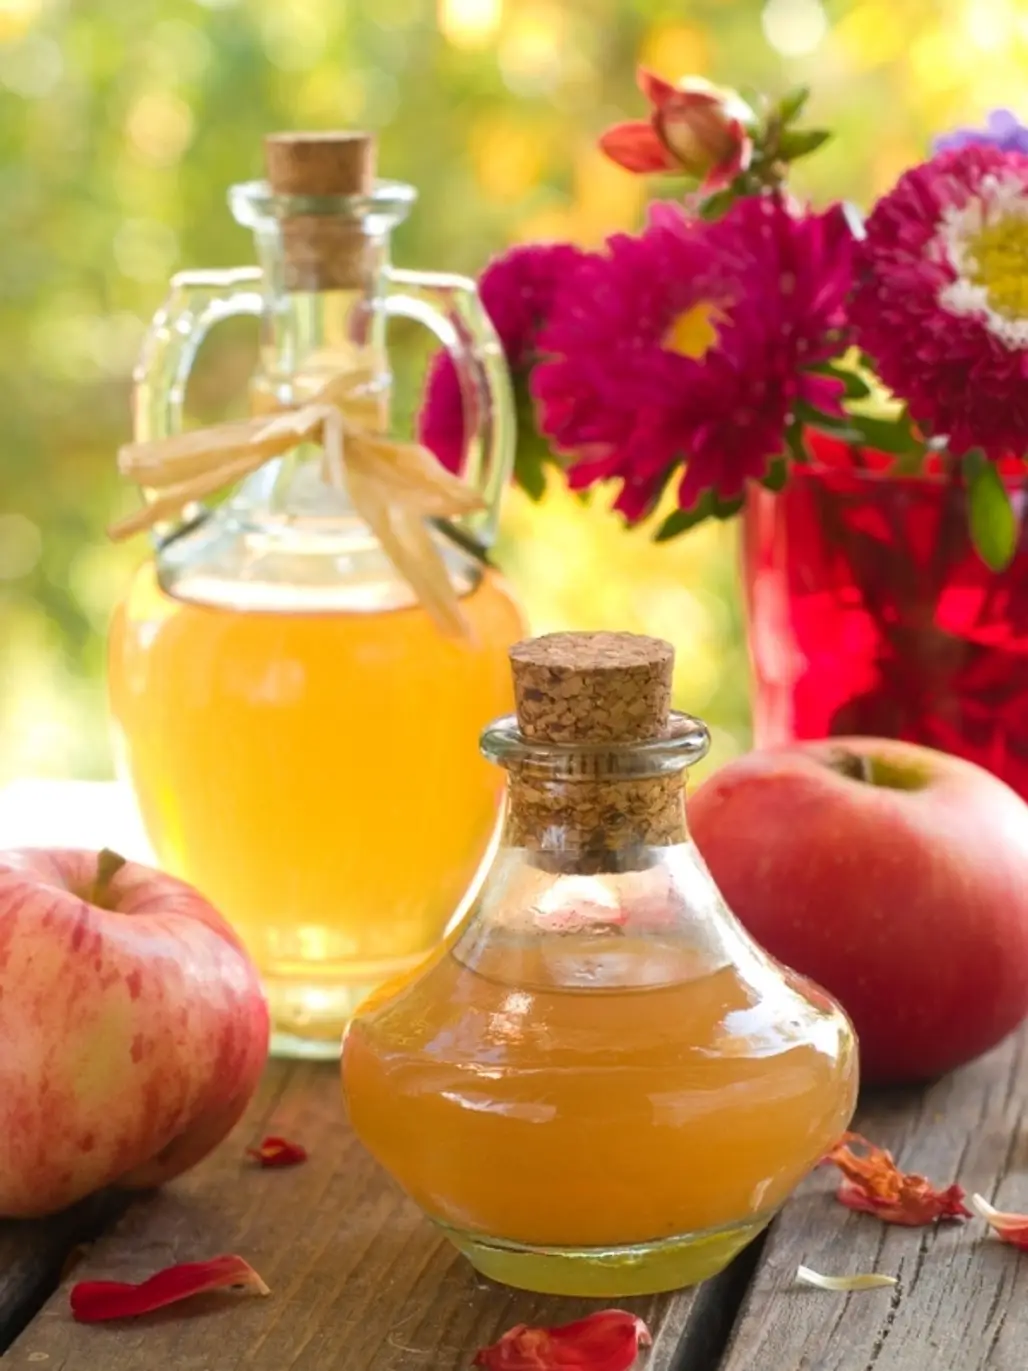 Use Apple Cider Instead of Water